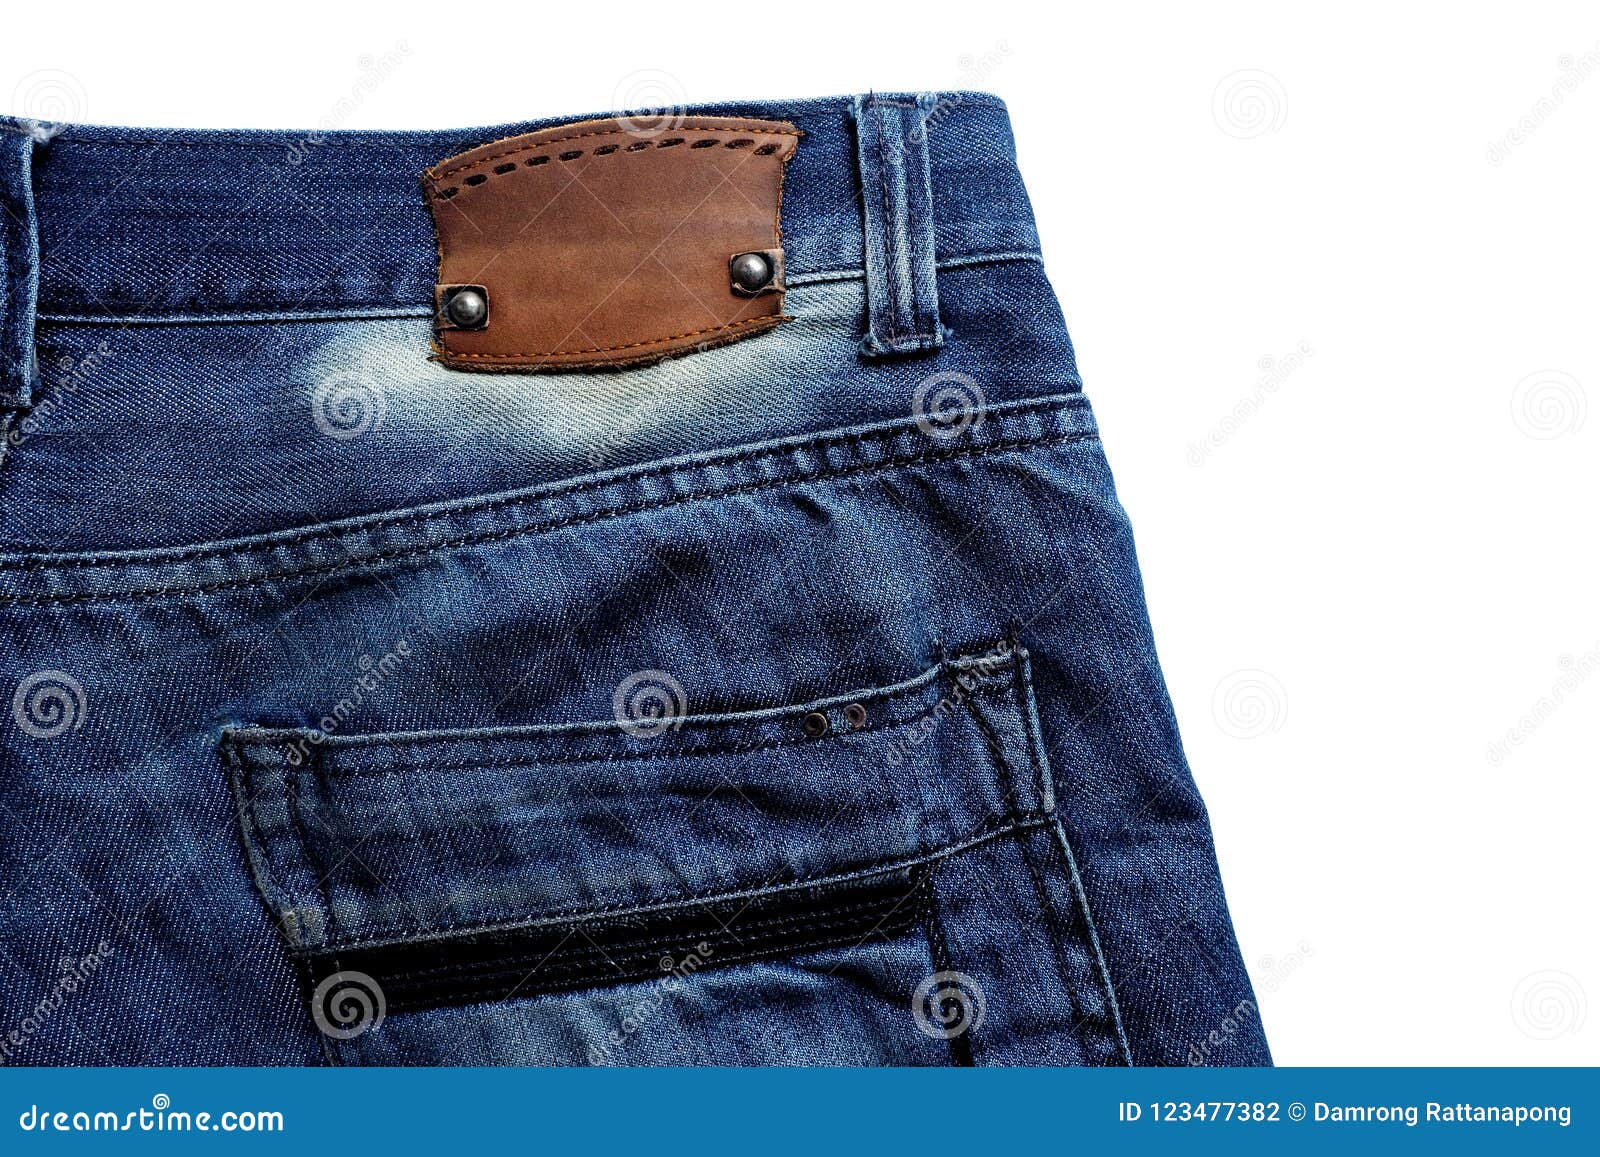 Jeans Denim Blank Label Leather Isolate on White Stock Photo - Image of ...